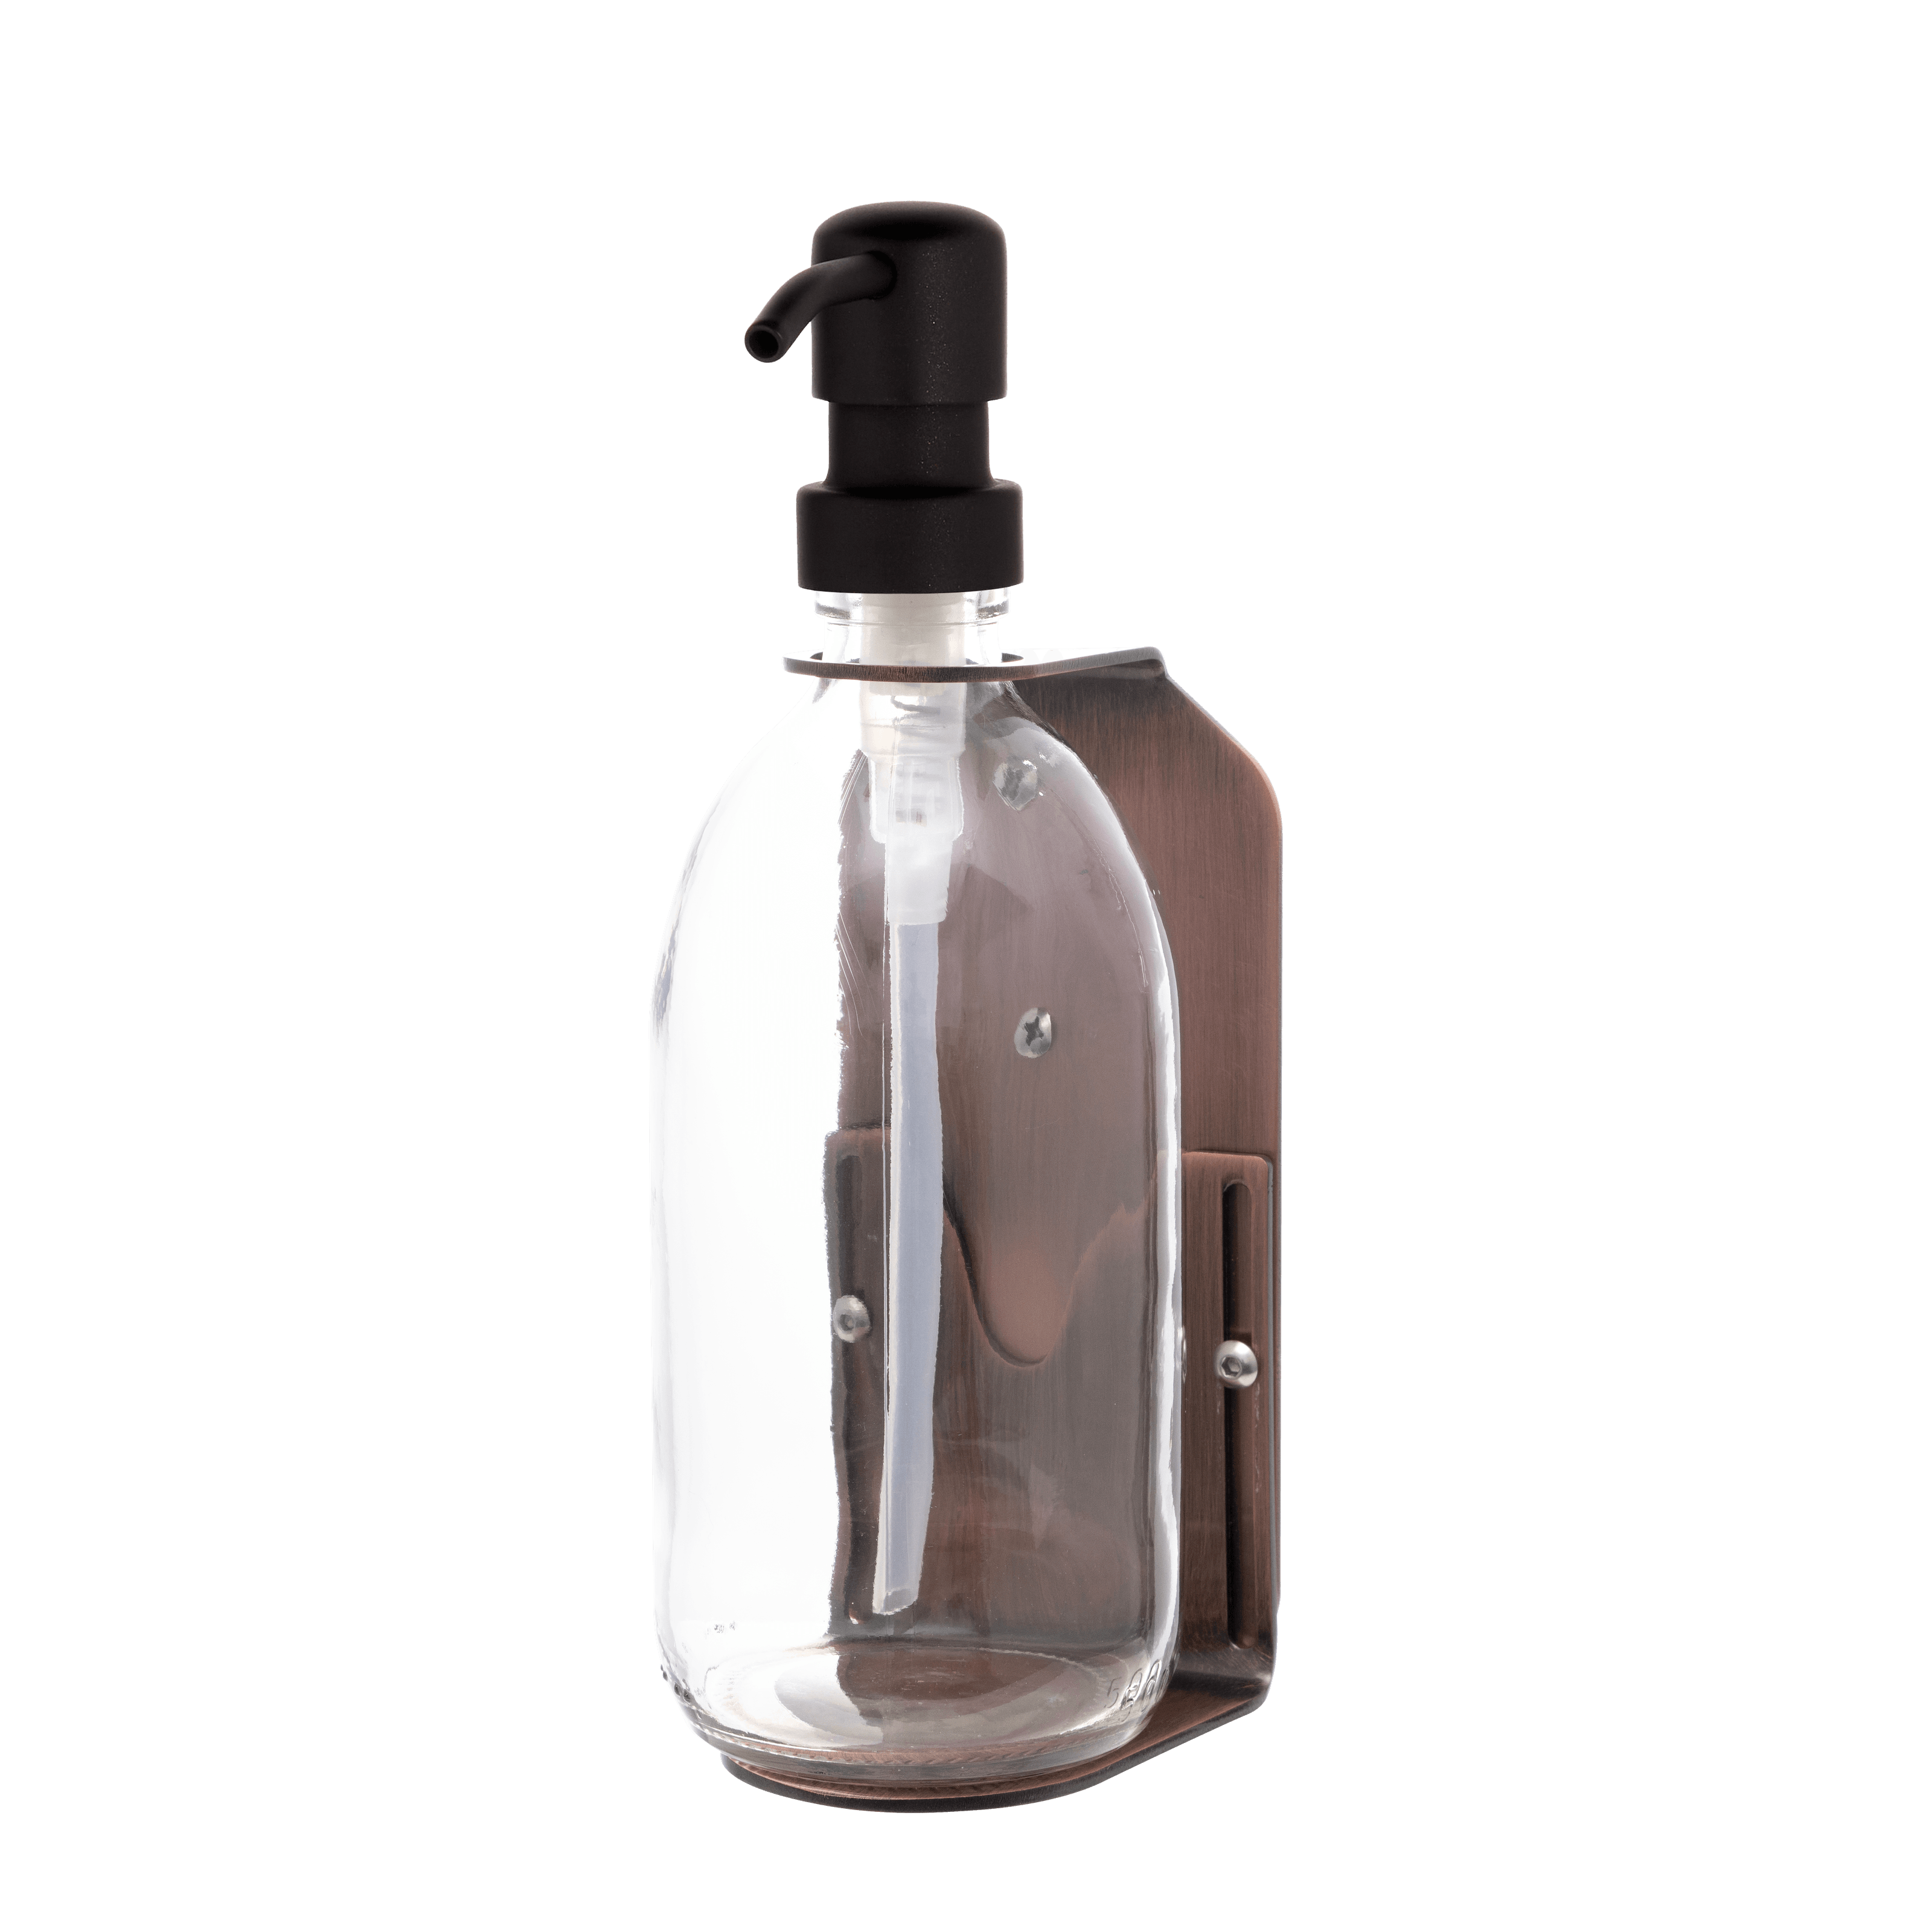 Copper Wall Mounted Soap Dispenser